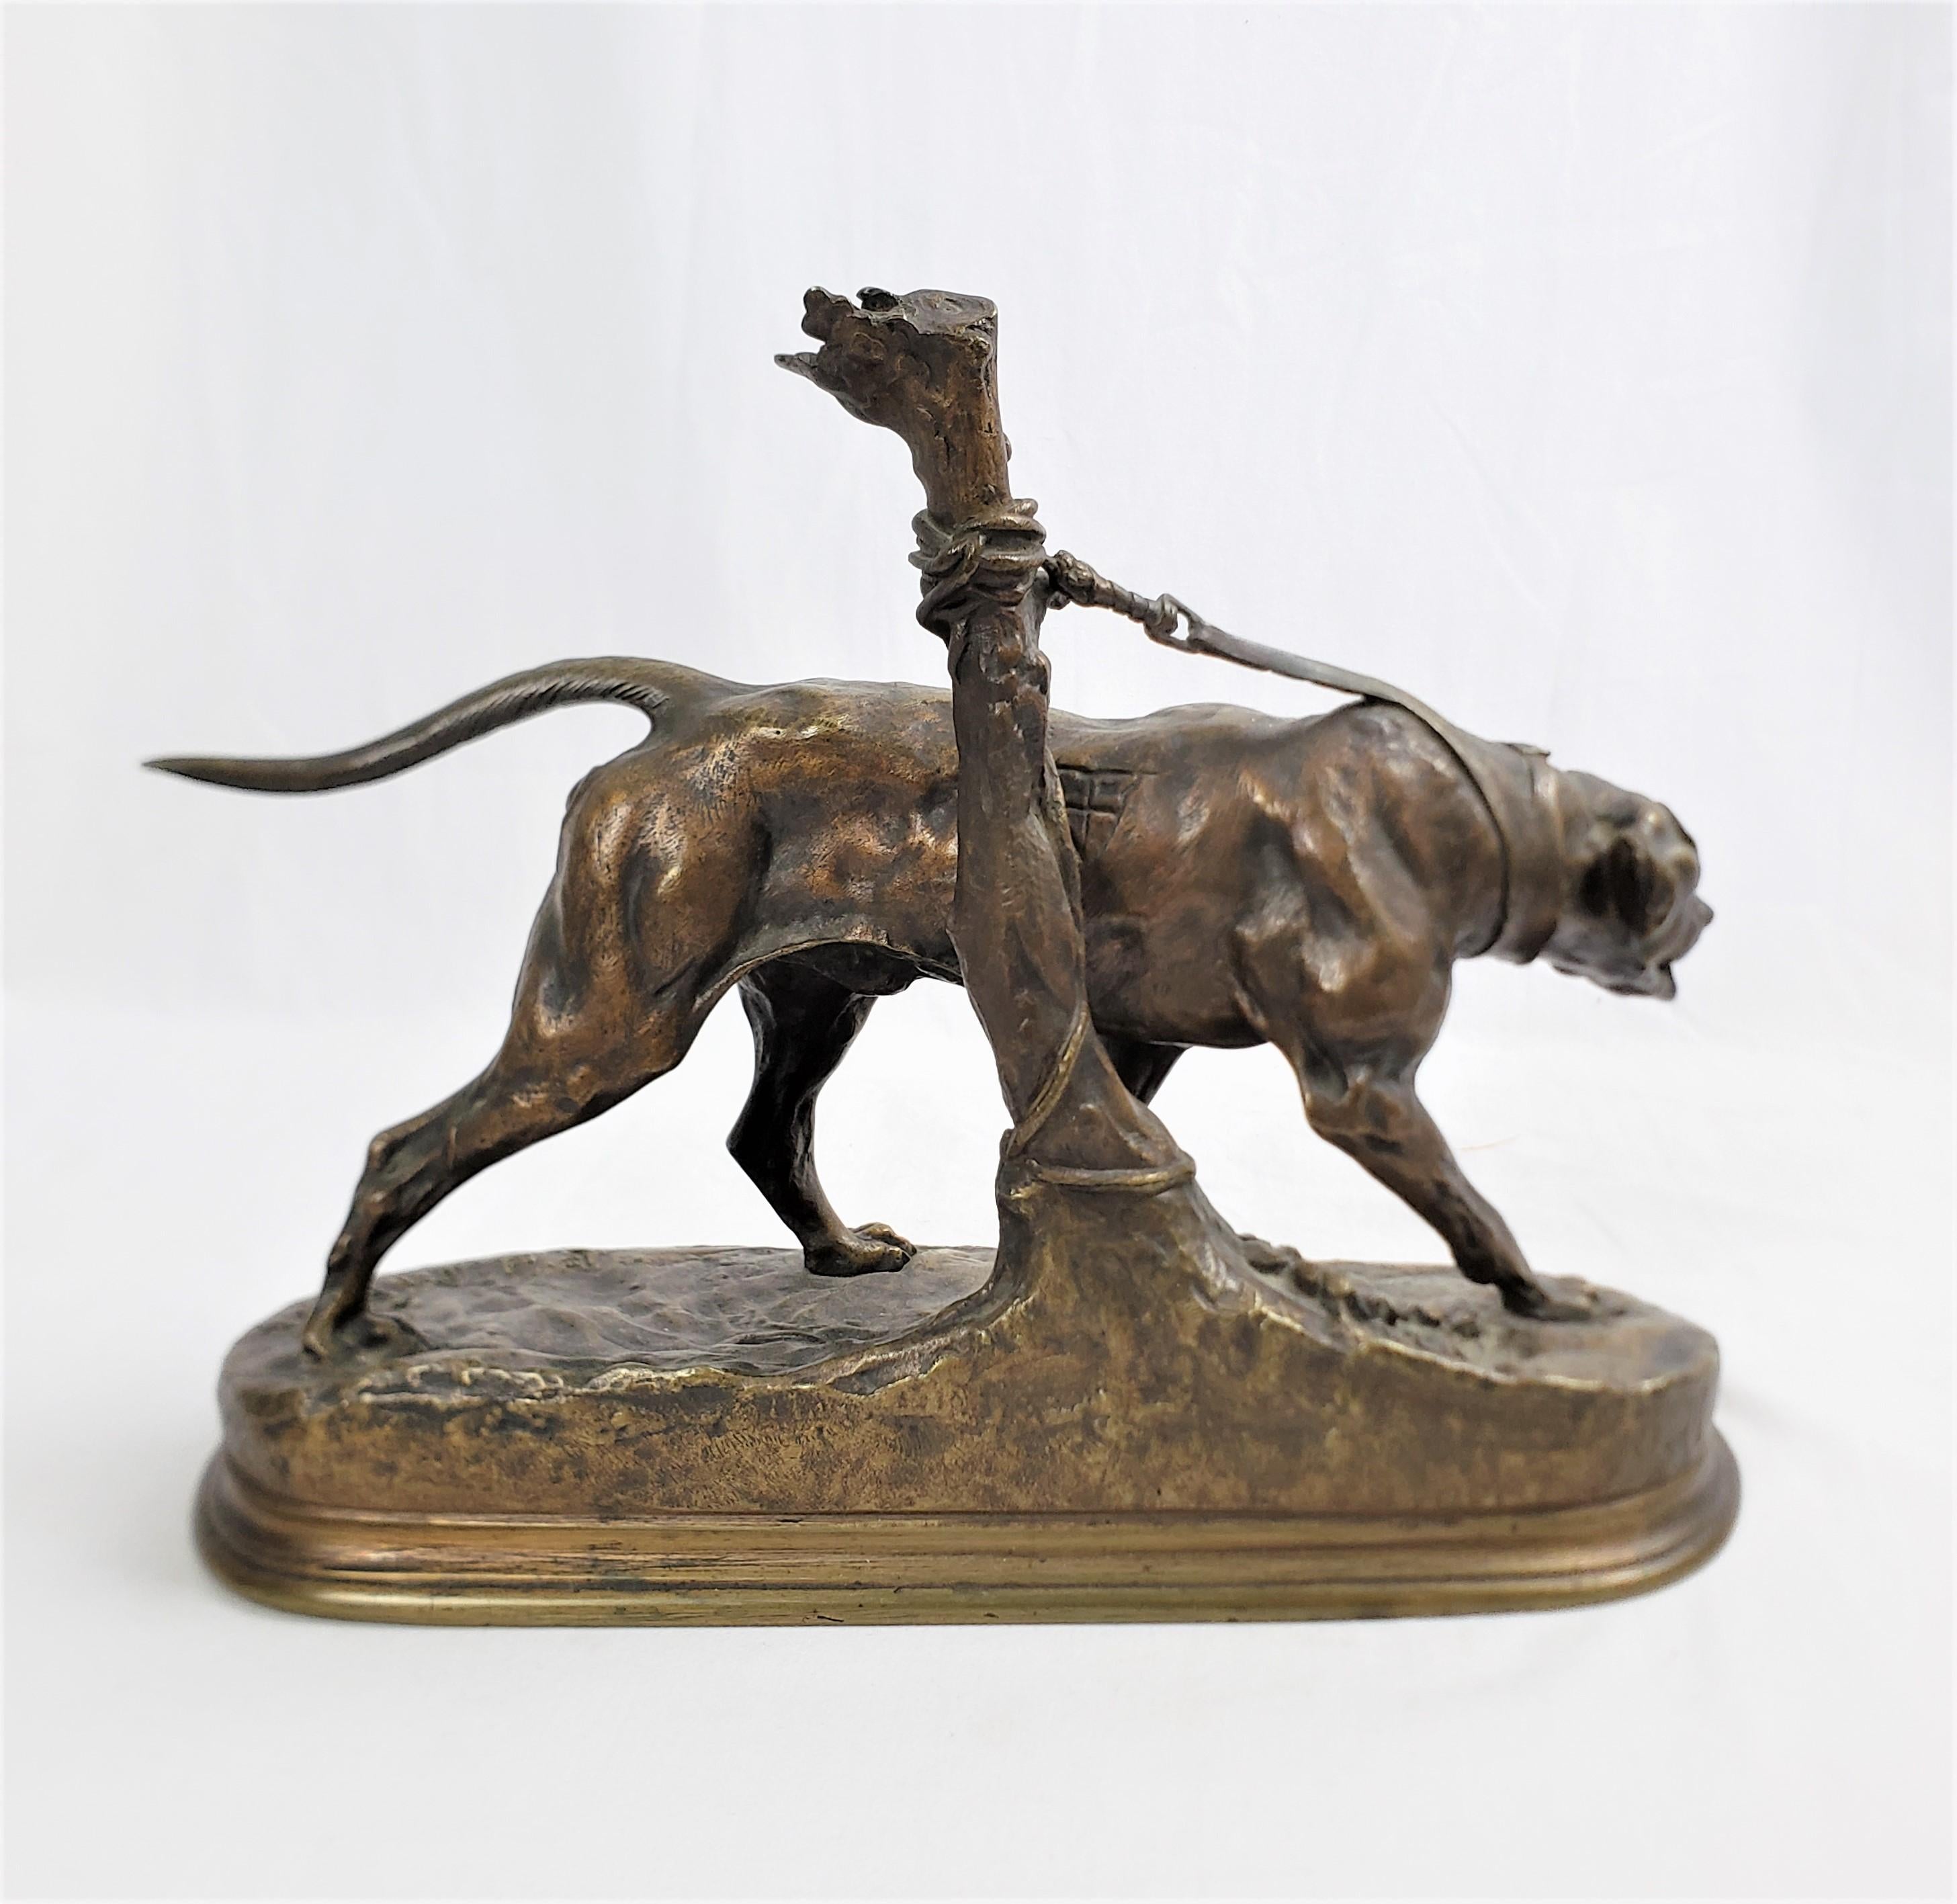 Antique P.J. Mene Signed French Bronze Sculpture of a Panting Dog Tied to a Post In Good Condition For Sale In Hamilton, Ontario